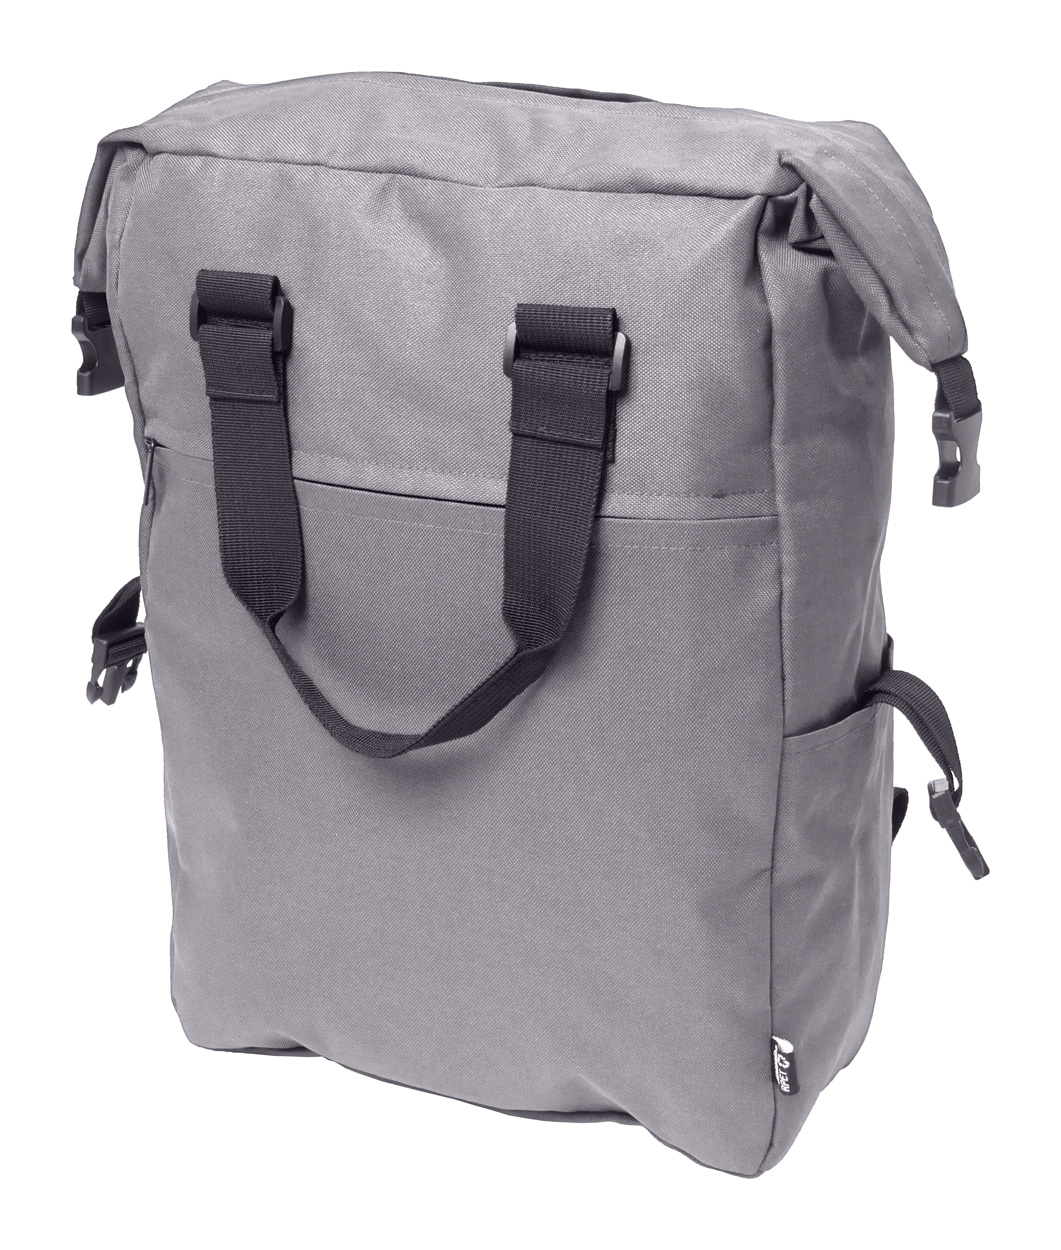 City laptop backpack ELLISON made of recycled material